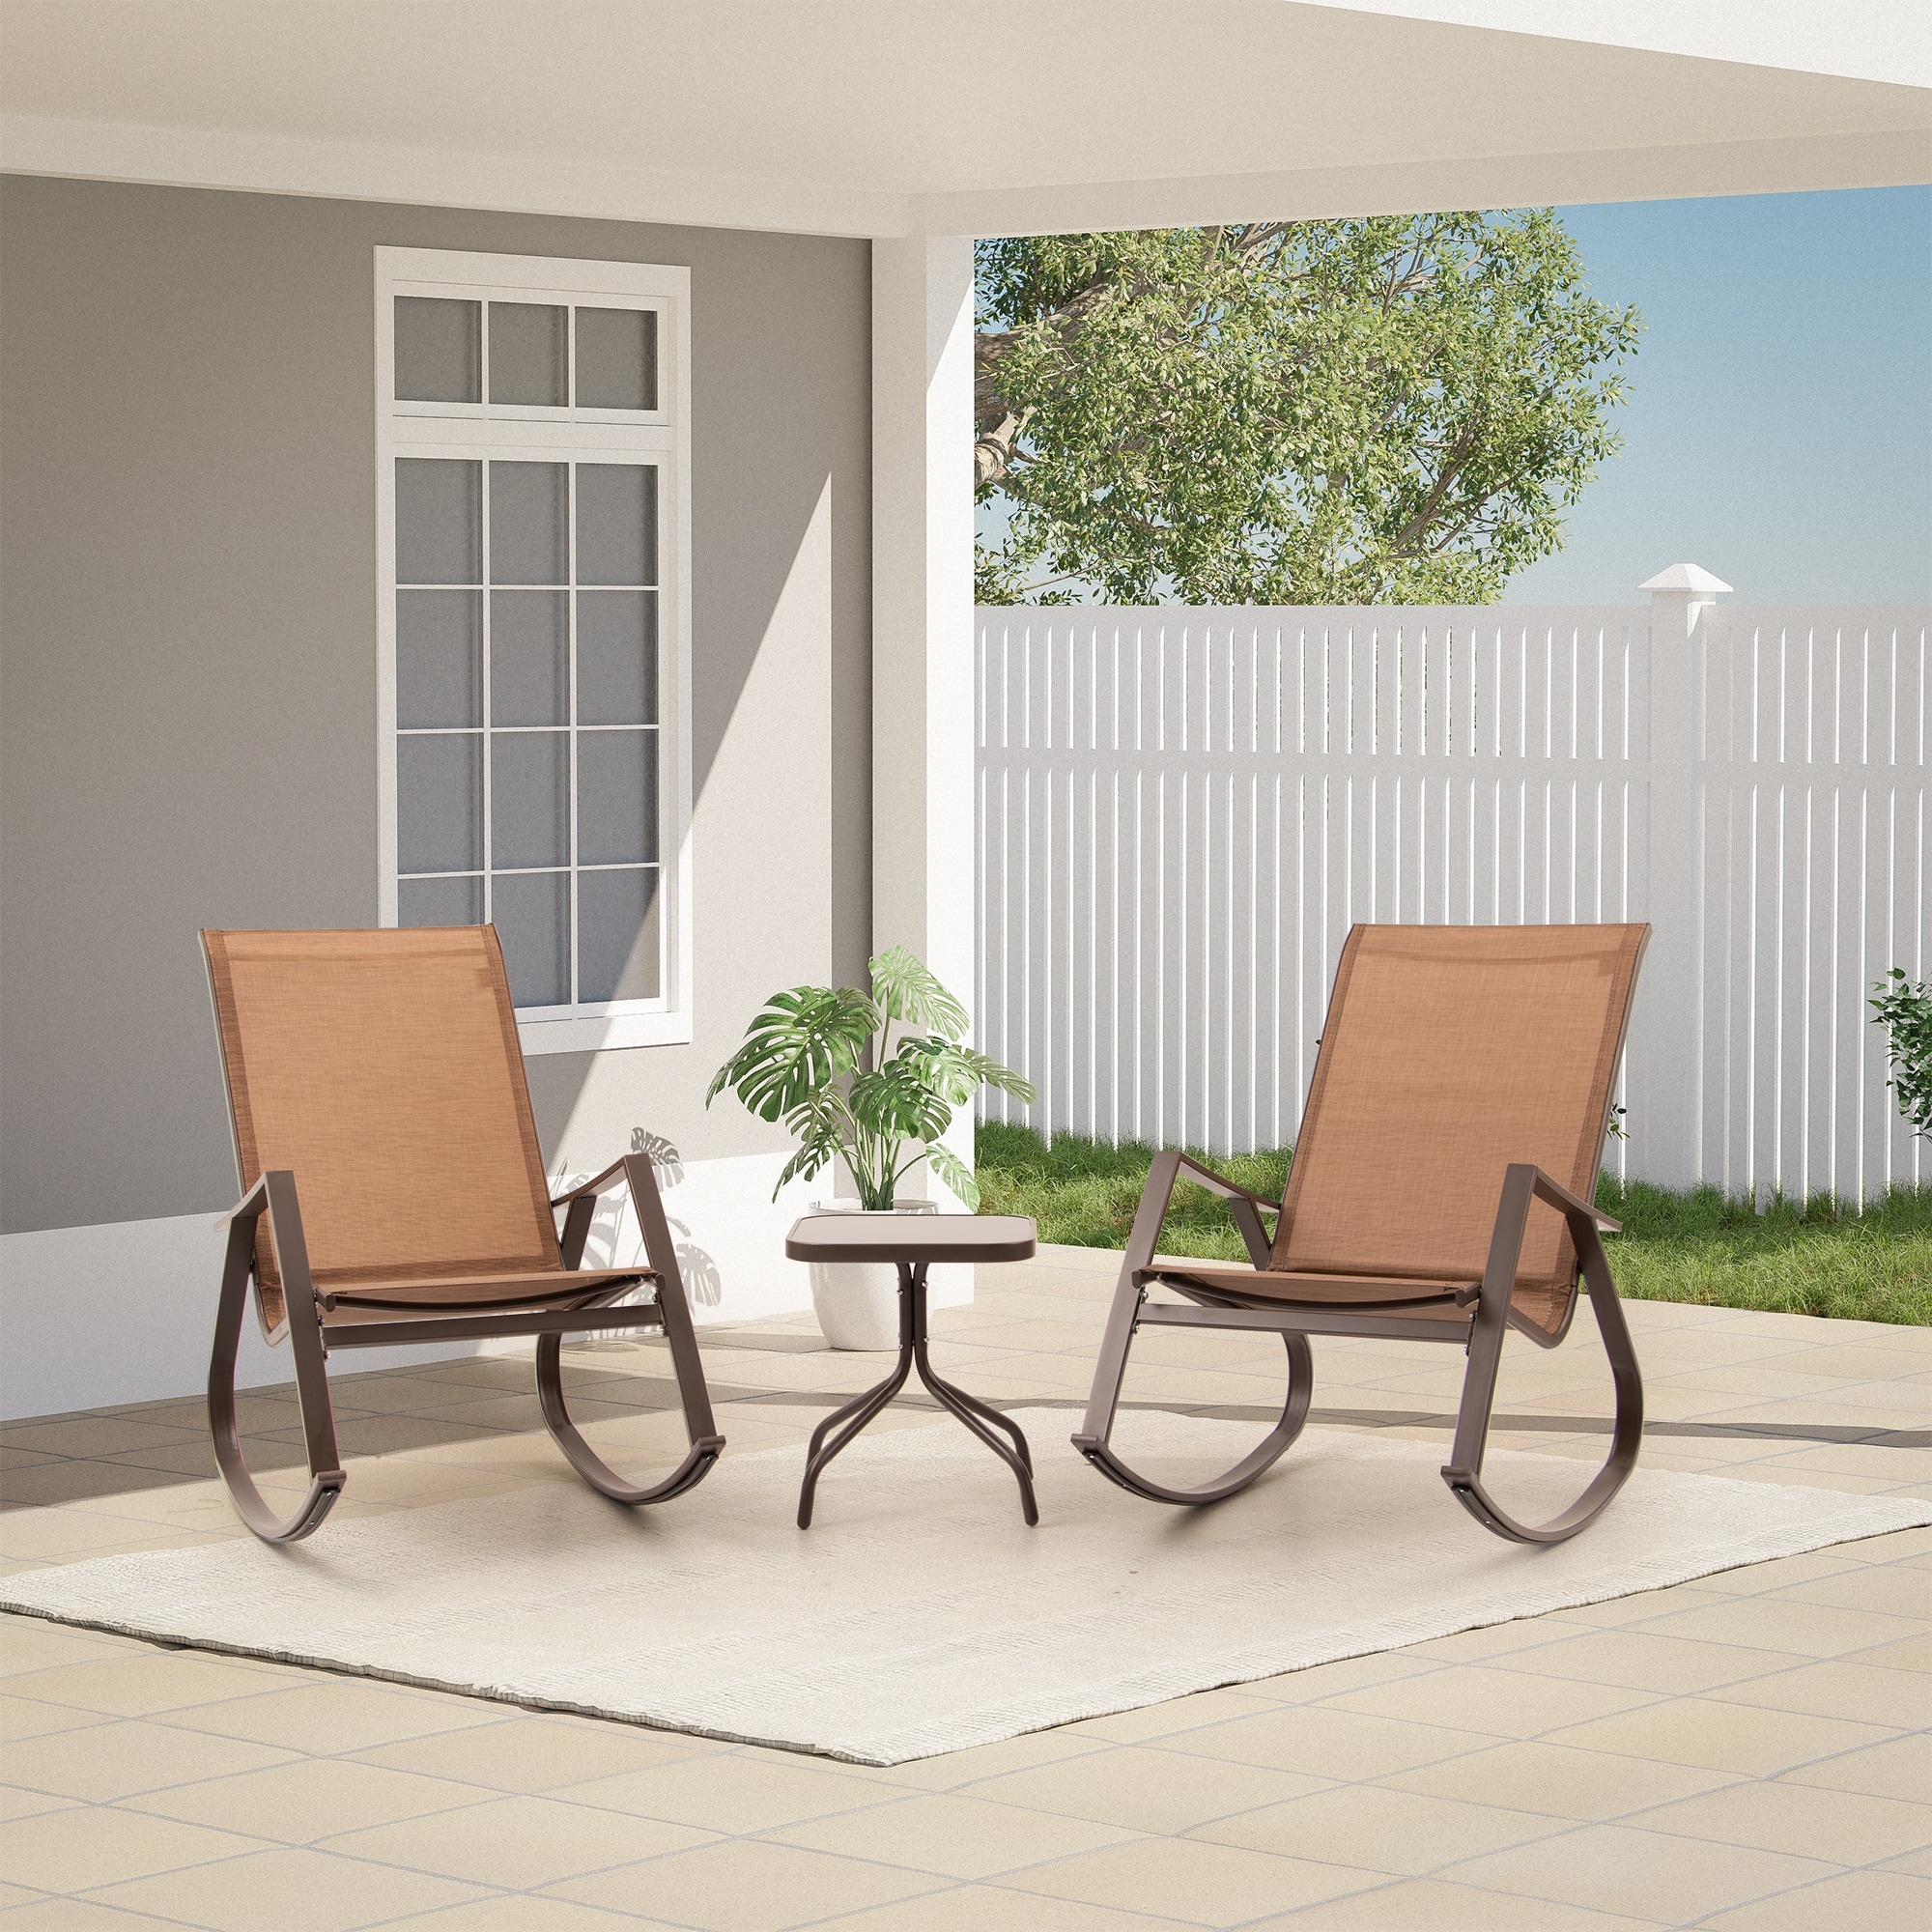 Pellebant 3 Piece Patio Rocking Steel Bistro Set With Square Table